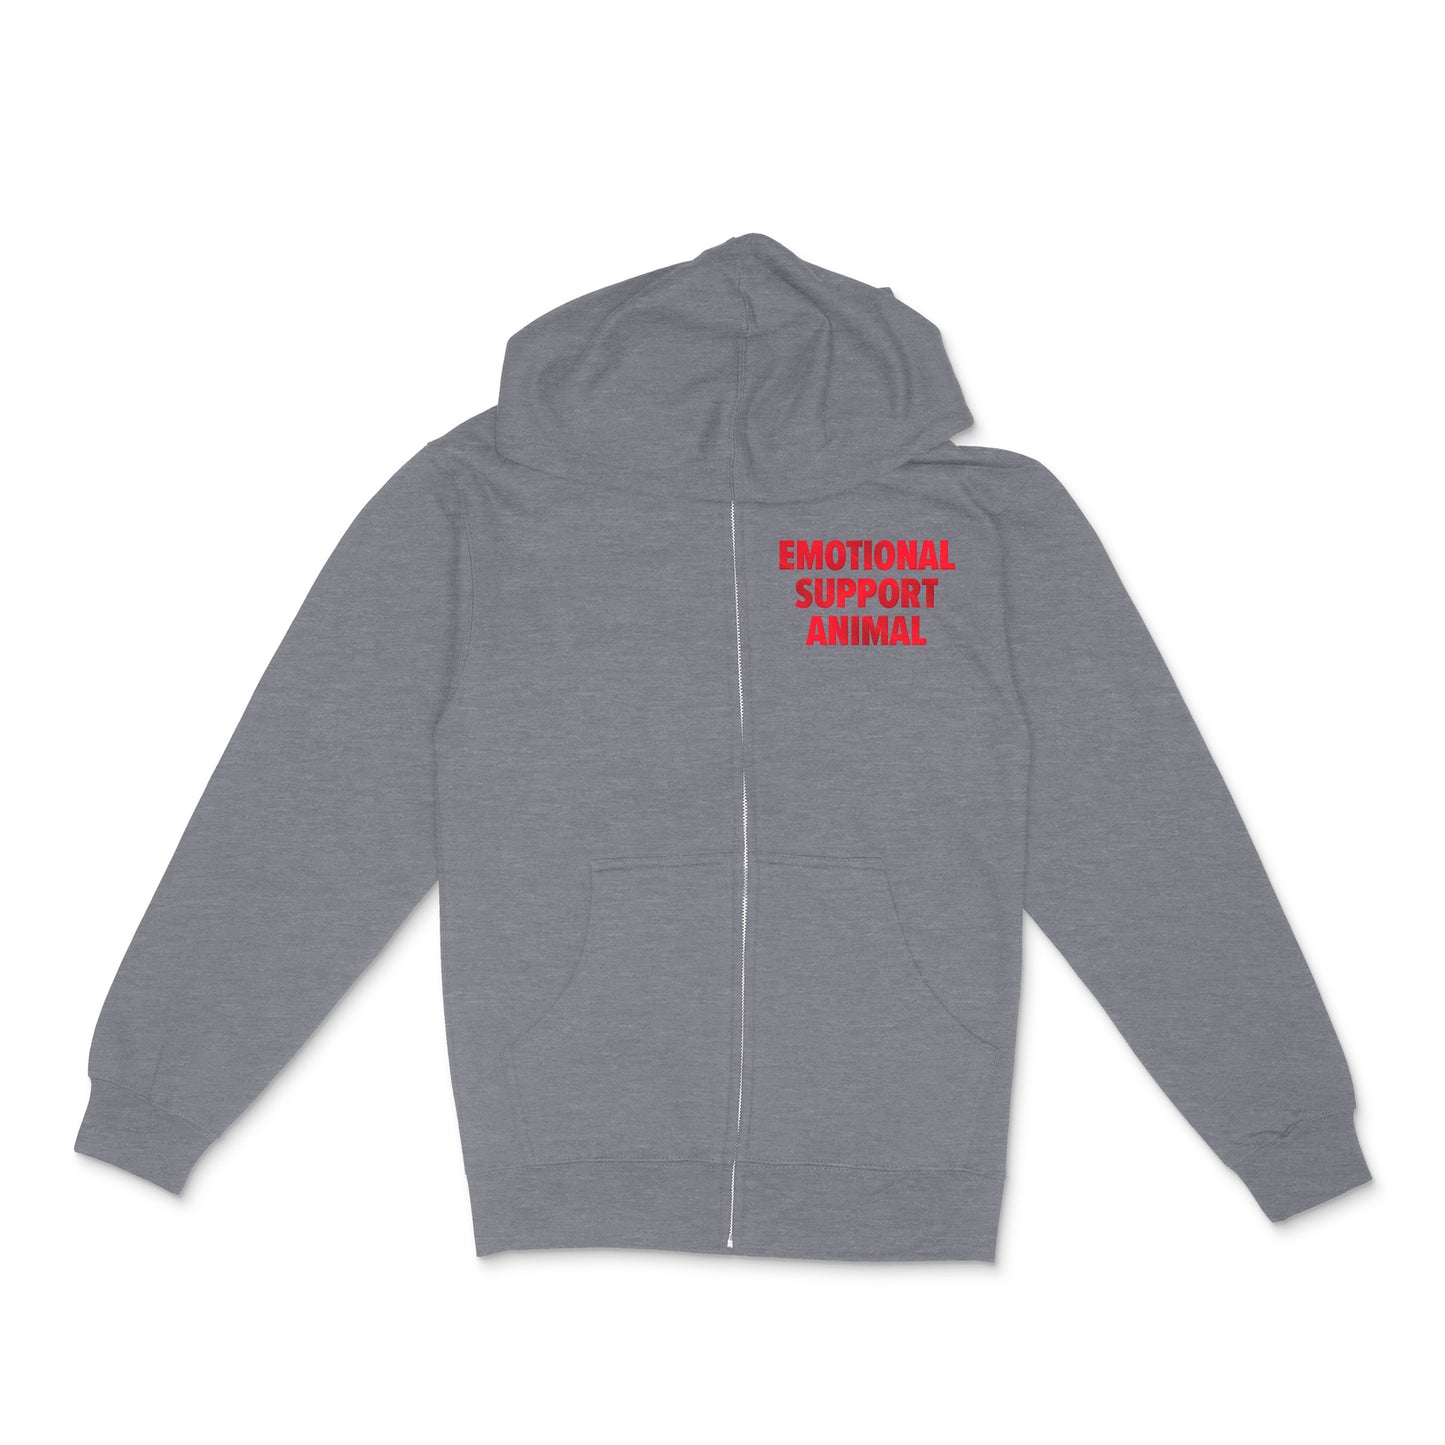 gunmetal heather unisex zip hoodie with custom sample text "Emotional Support Animal" in red metallic, tall text style on left chest of garment